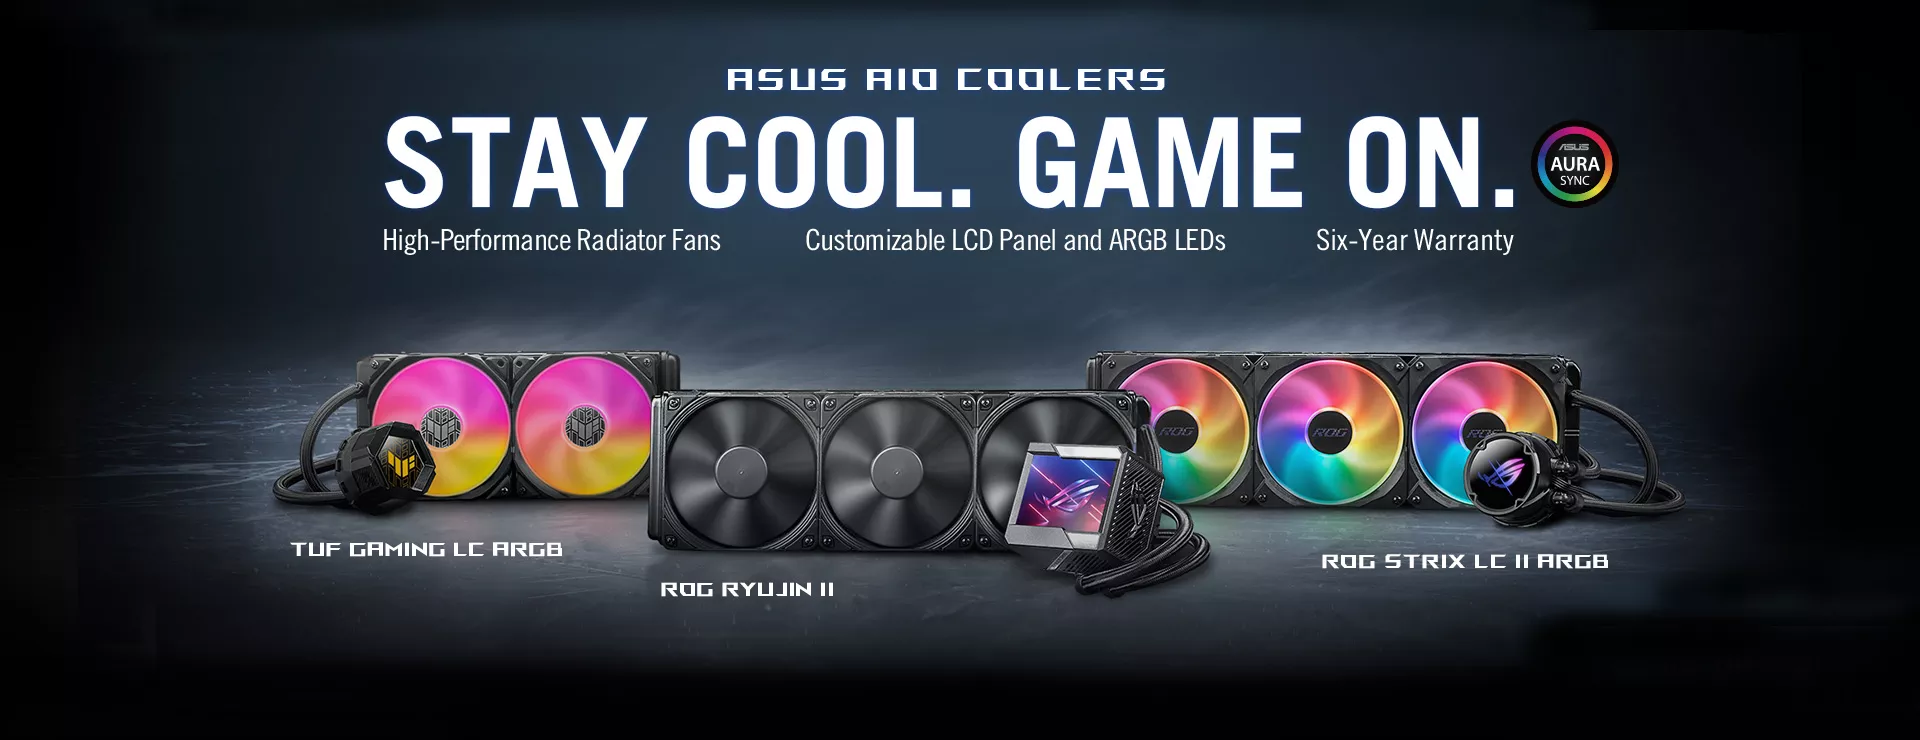 all-in-one-liquid-cooling